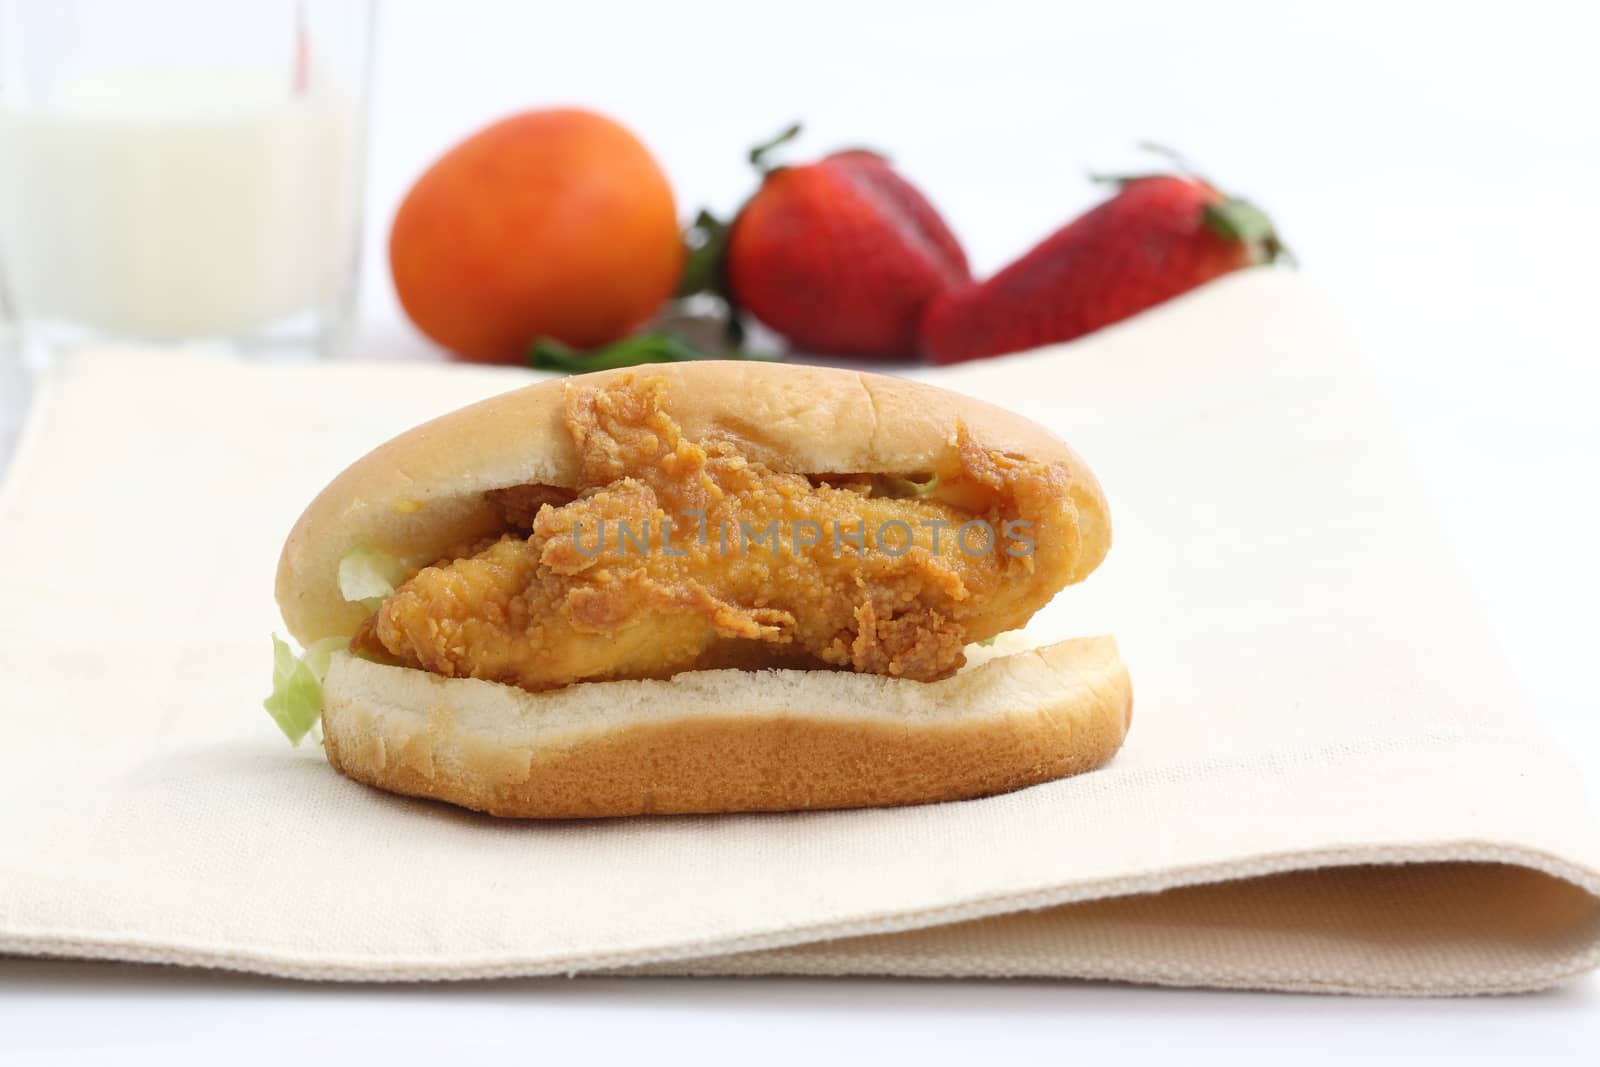 fry chicken sandwich isolated in white background by piyato